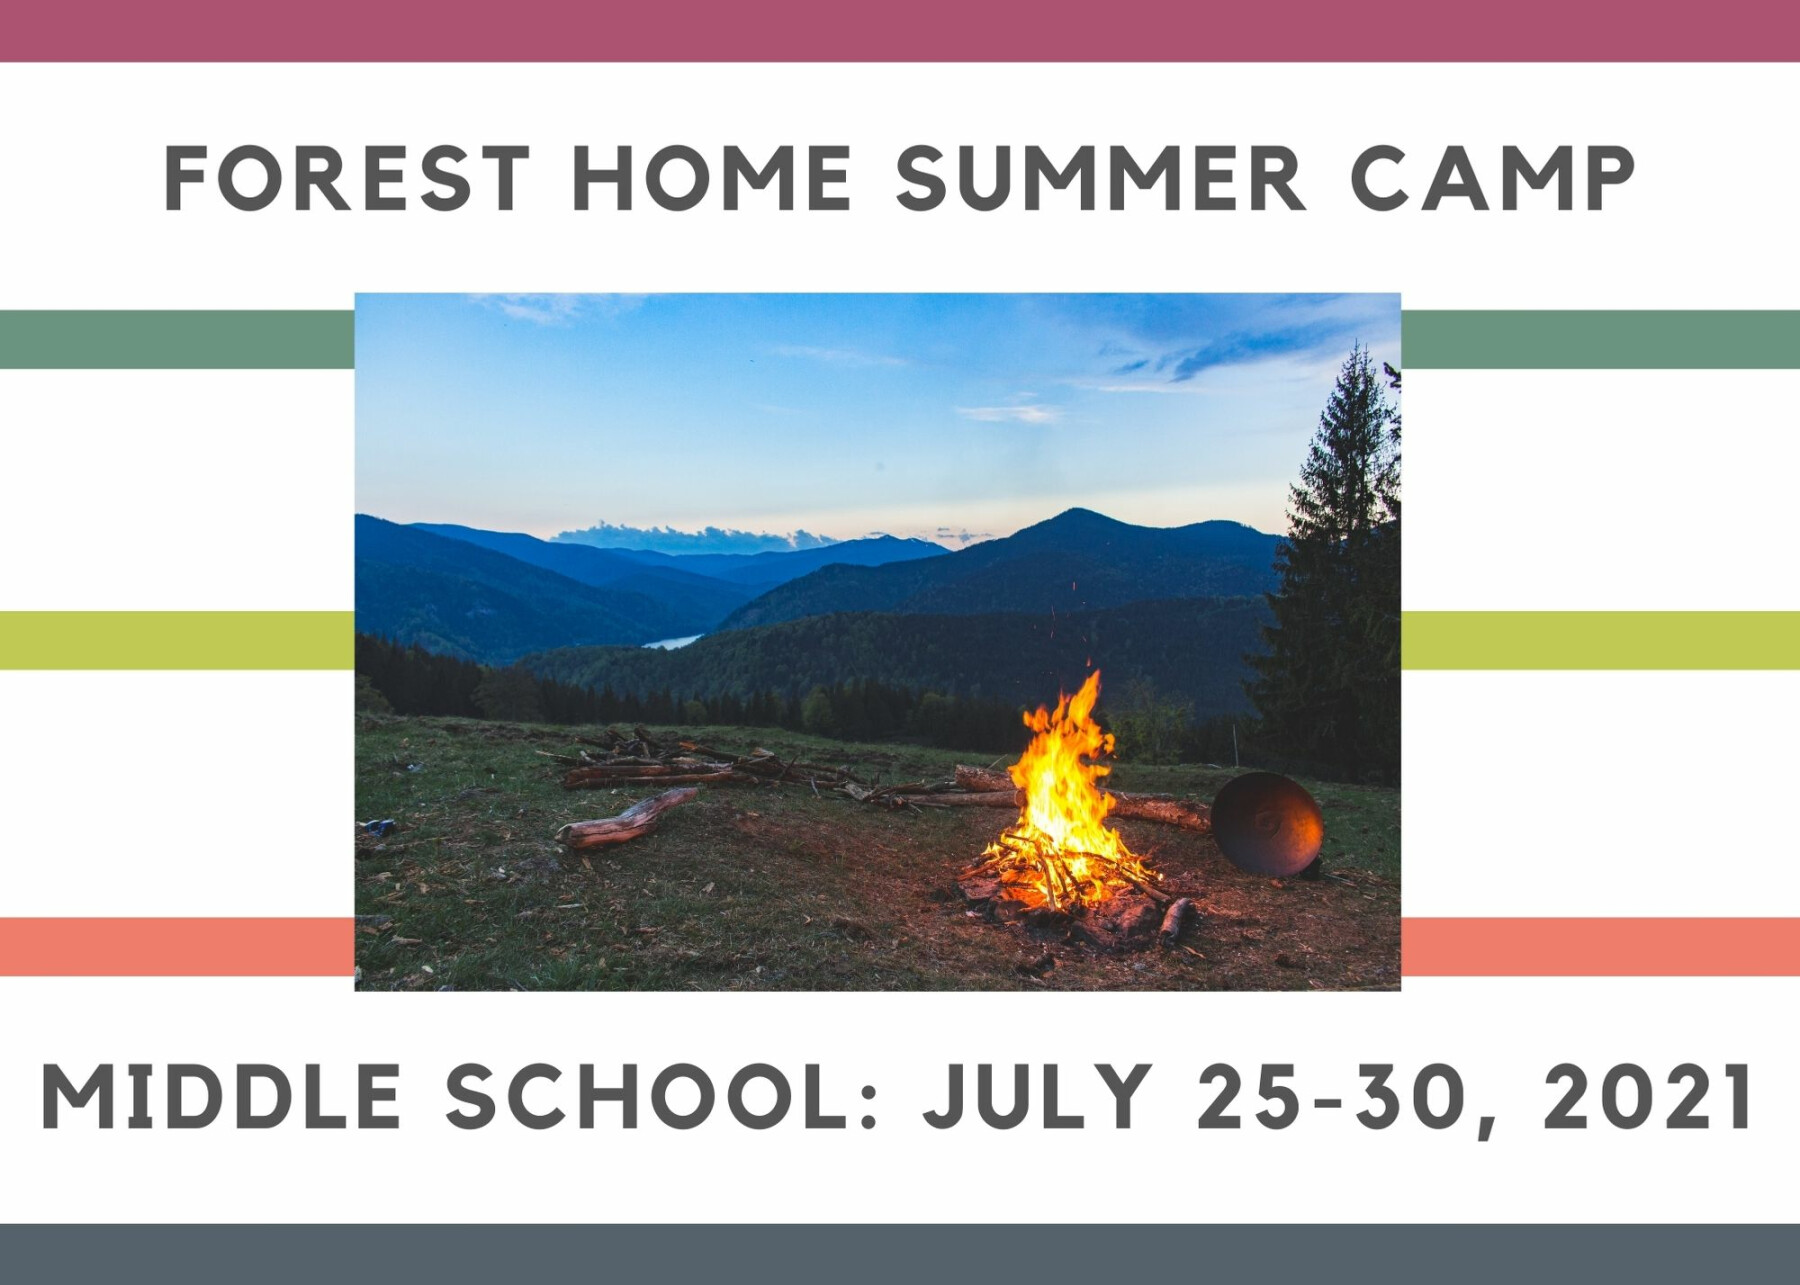 Forest Home Summer Camp, Forest Falls, CA Middle School Valley